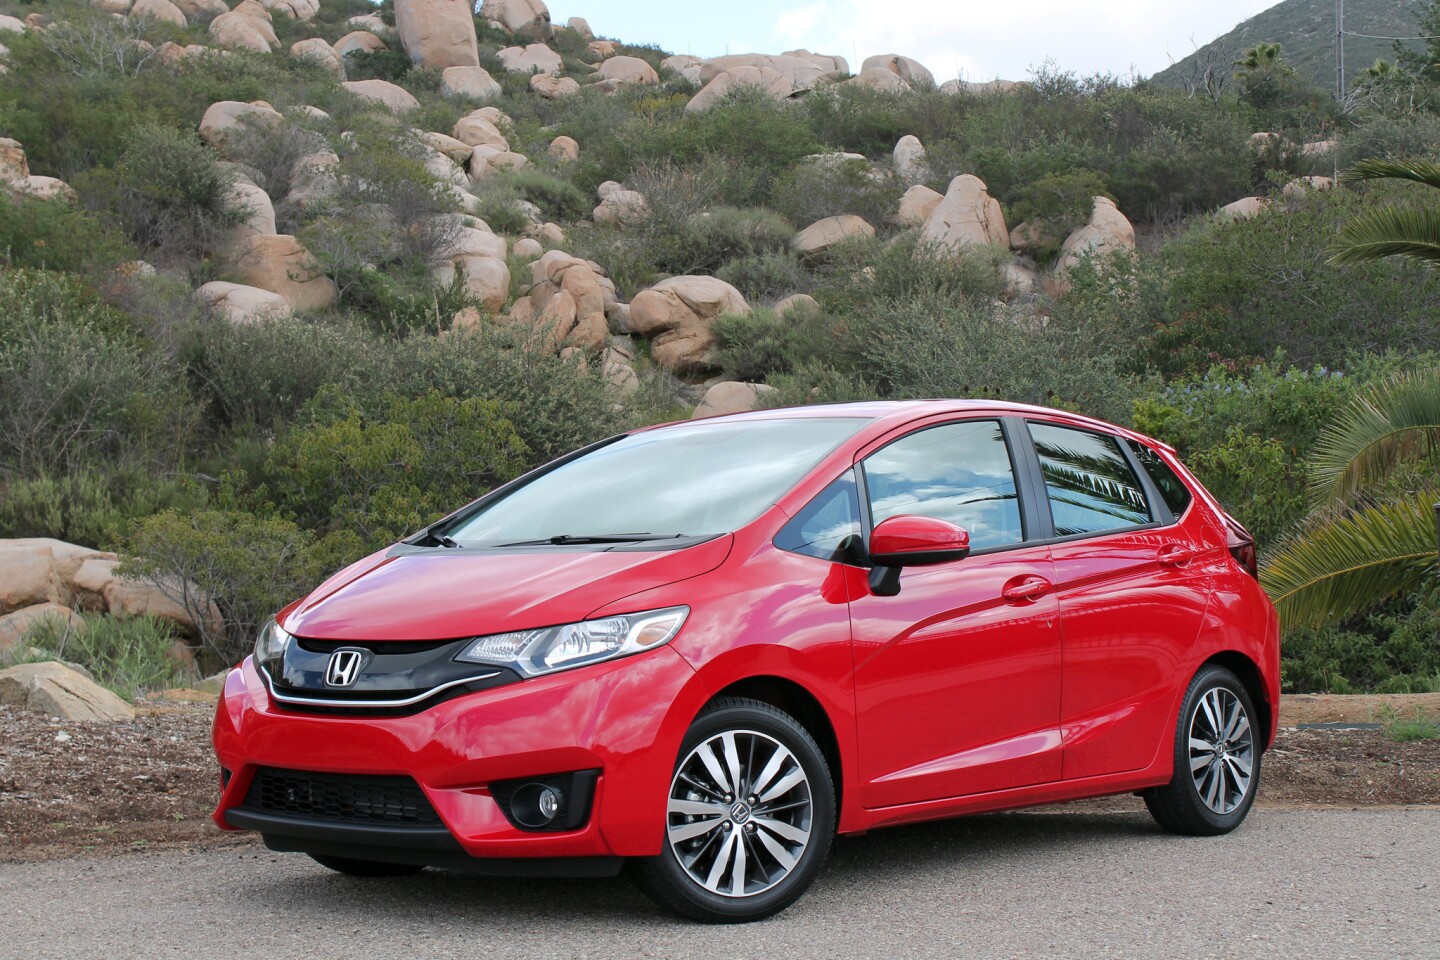 Topping the list of Kelley Blue Book's best back-to-school cars is the 2015 Honda Fit, which can be purchased for around $15,994.